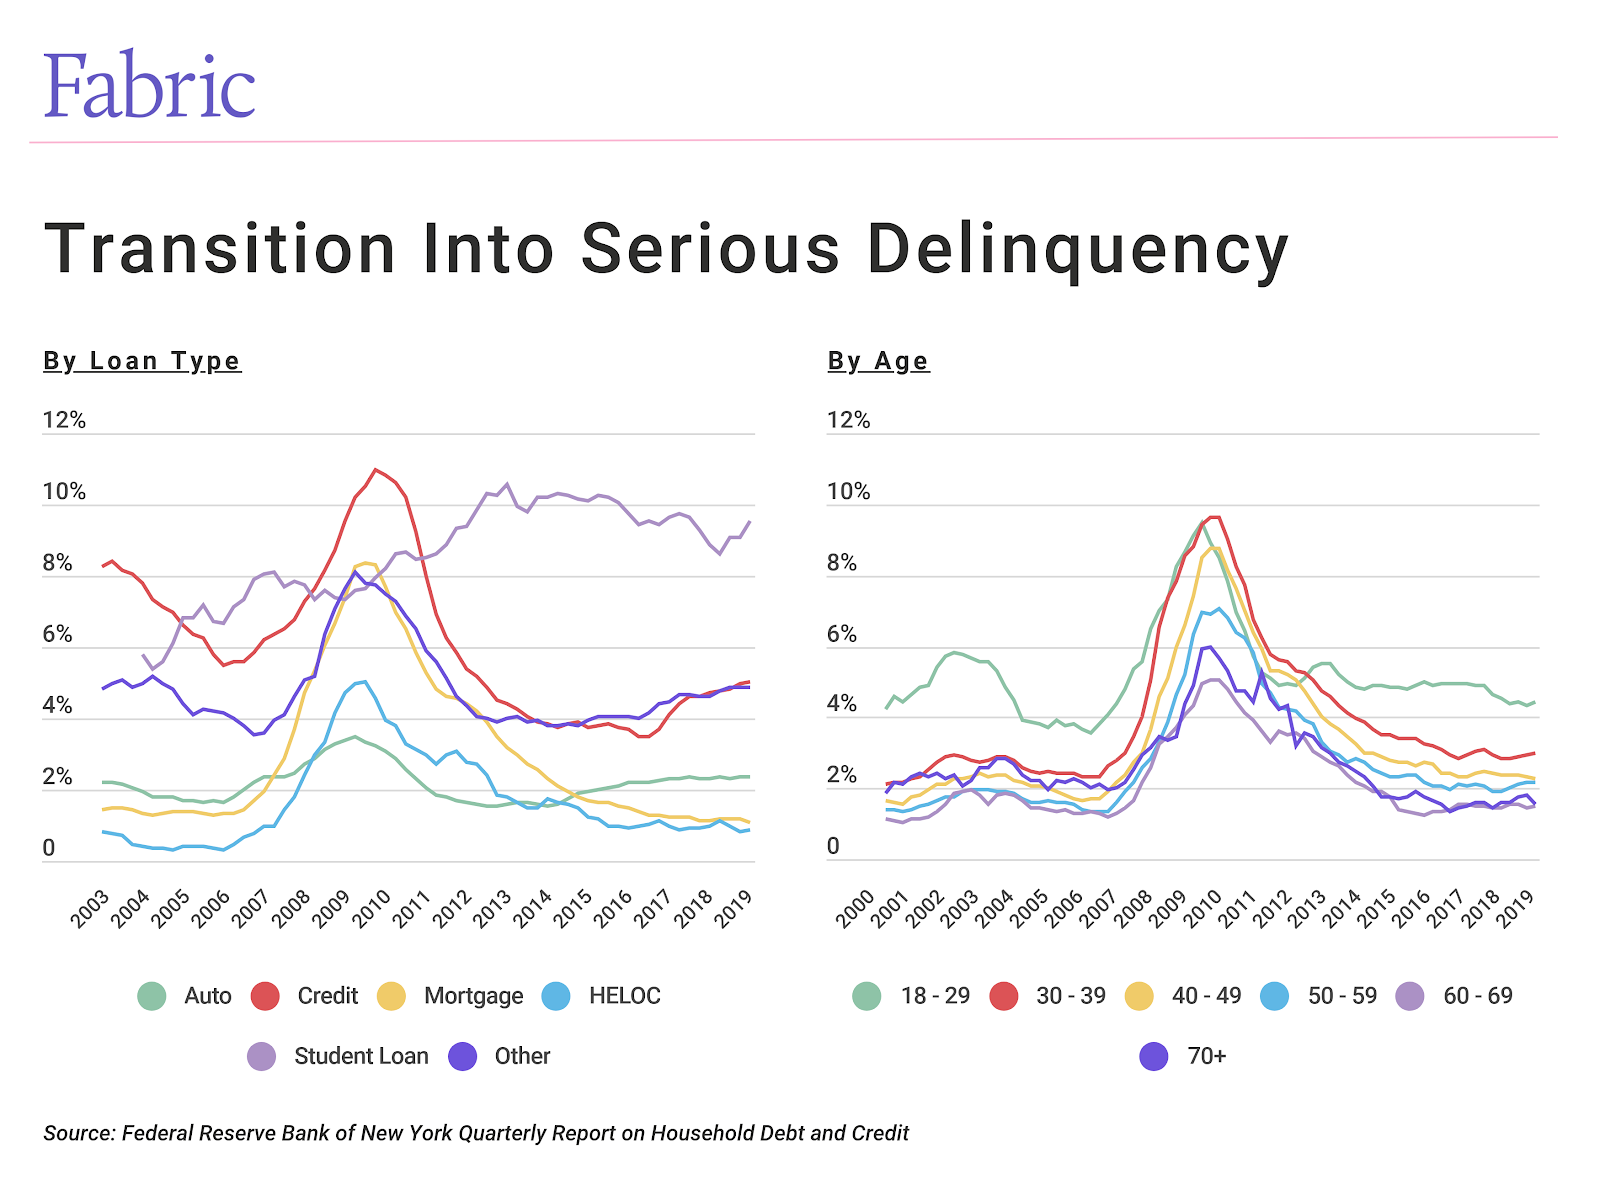 line graph showing percent of people in serious delinquency by loan type and by age